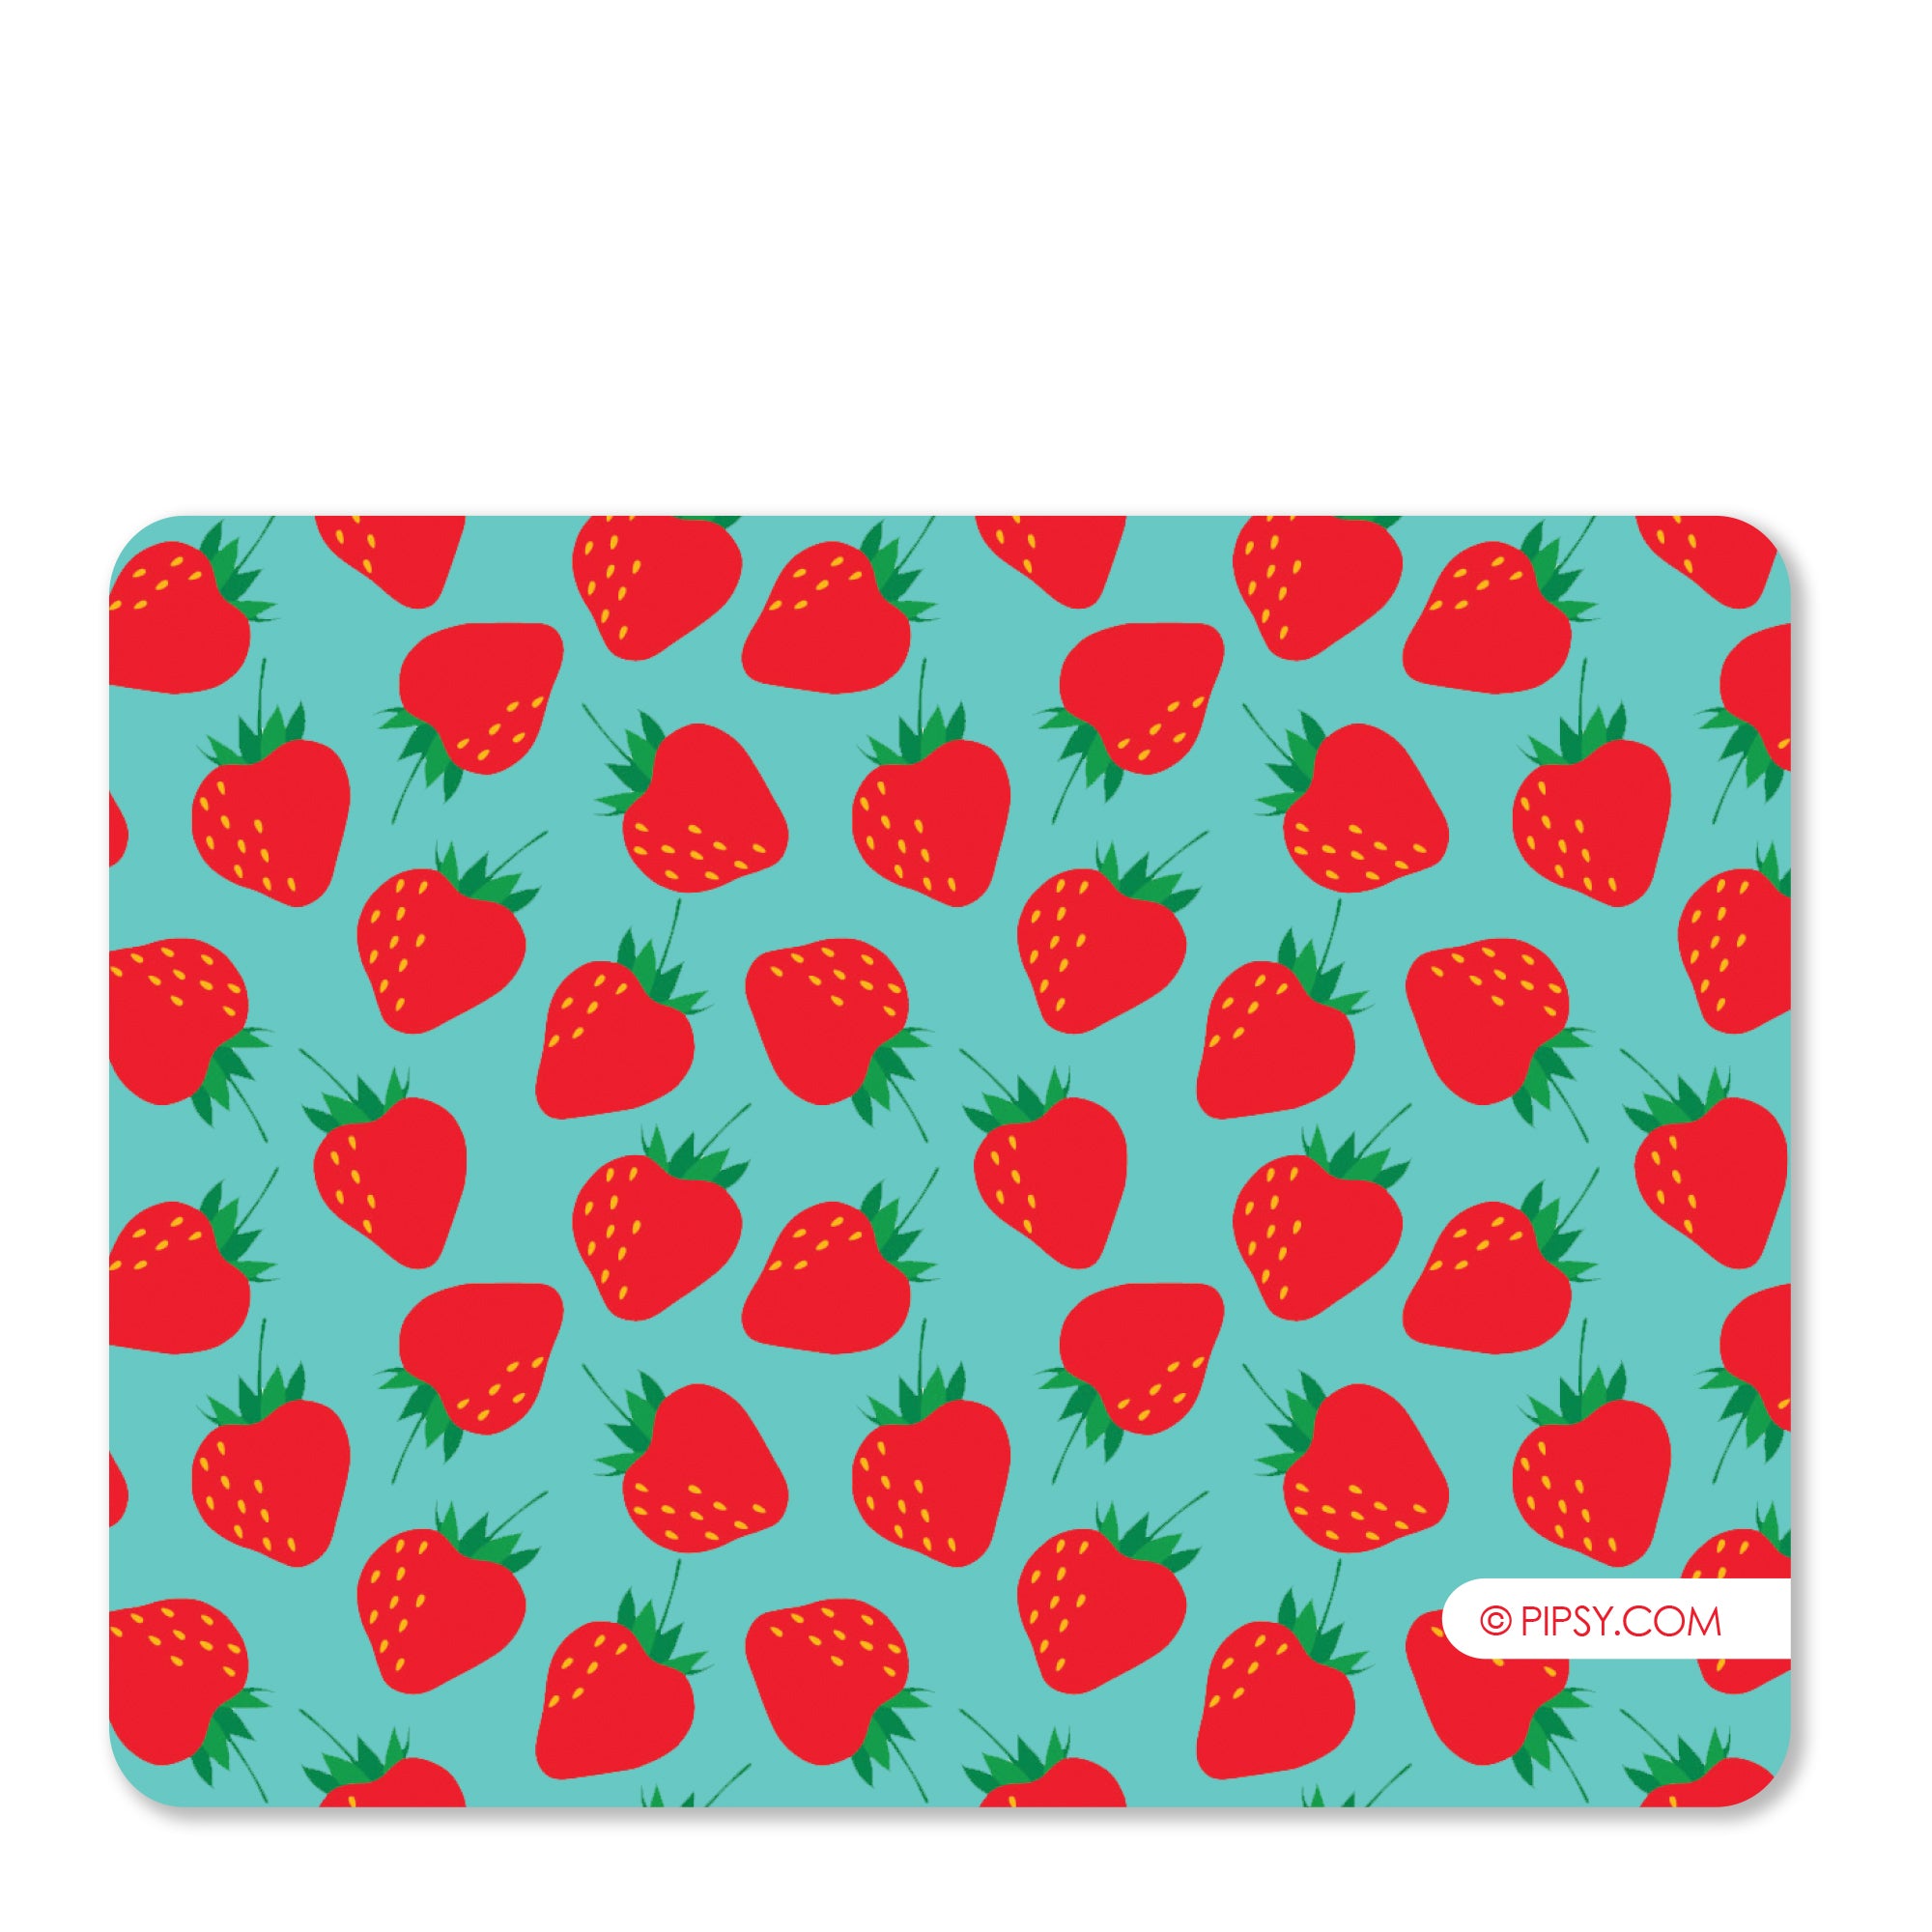 Strawberry stationery - thank you note cards to match a strawberry party theme, ultra heavy cardstock with 2 sided printing, comes with white envelopes, back view